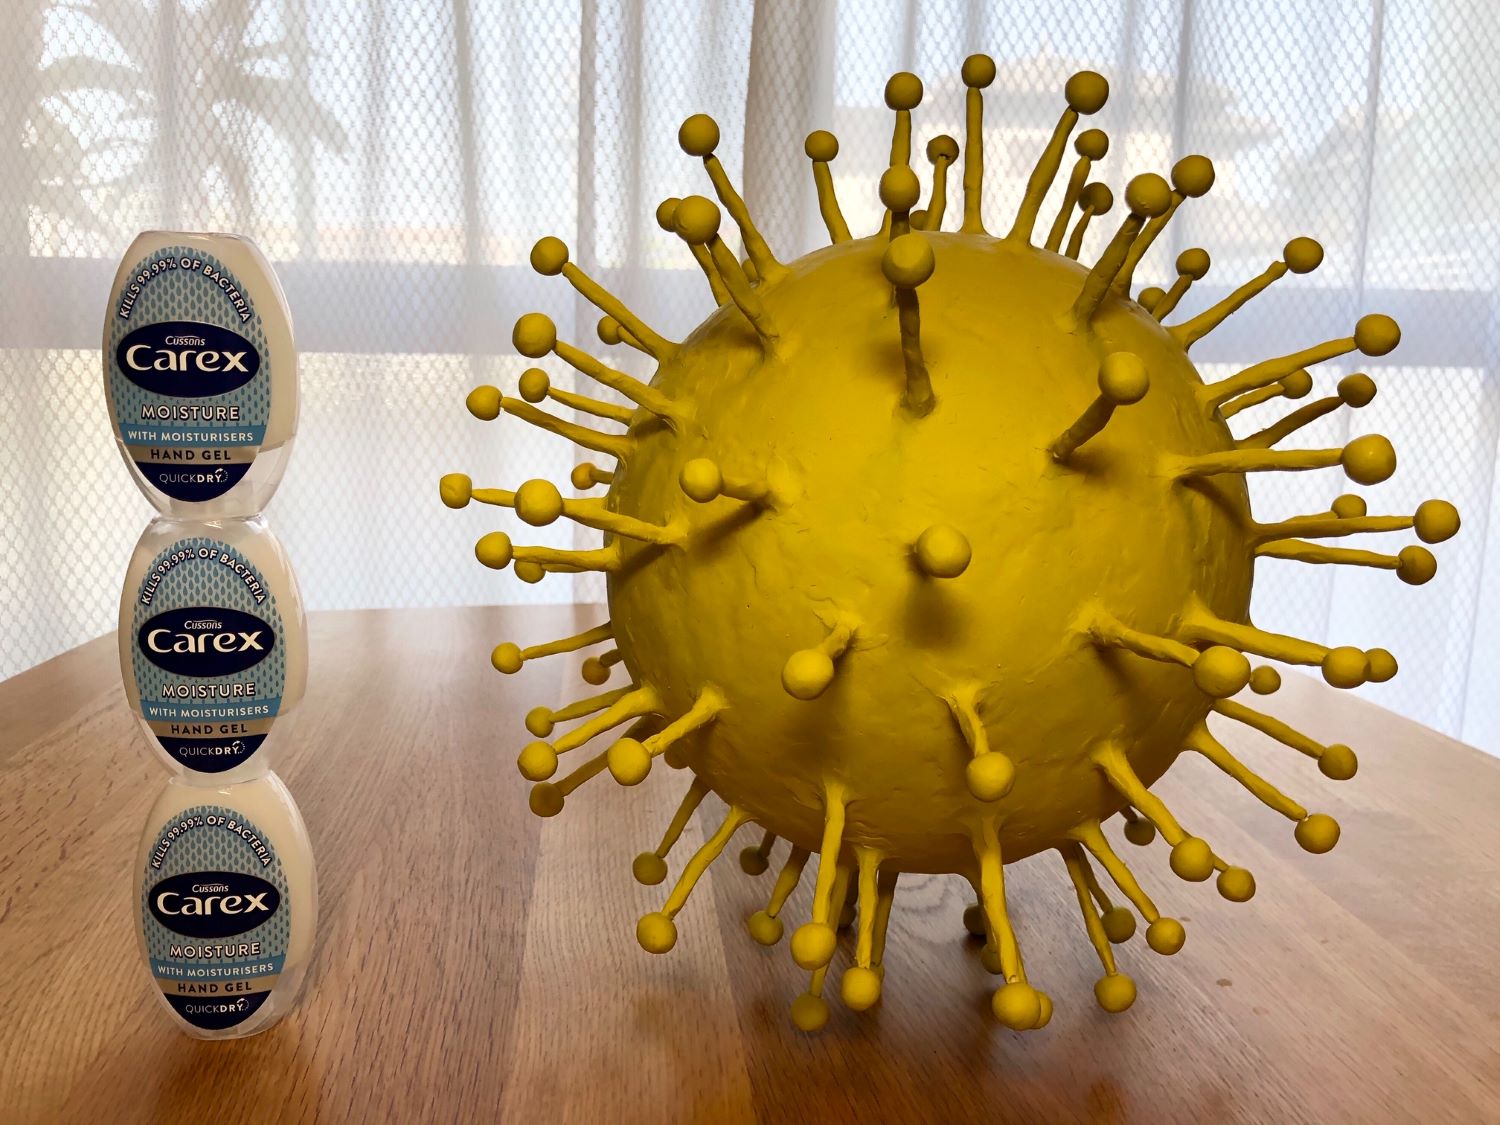 Digital image of large yellow virus cell on table with hand sanitiser